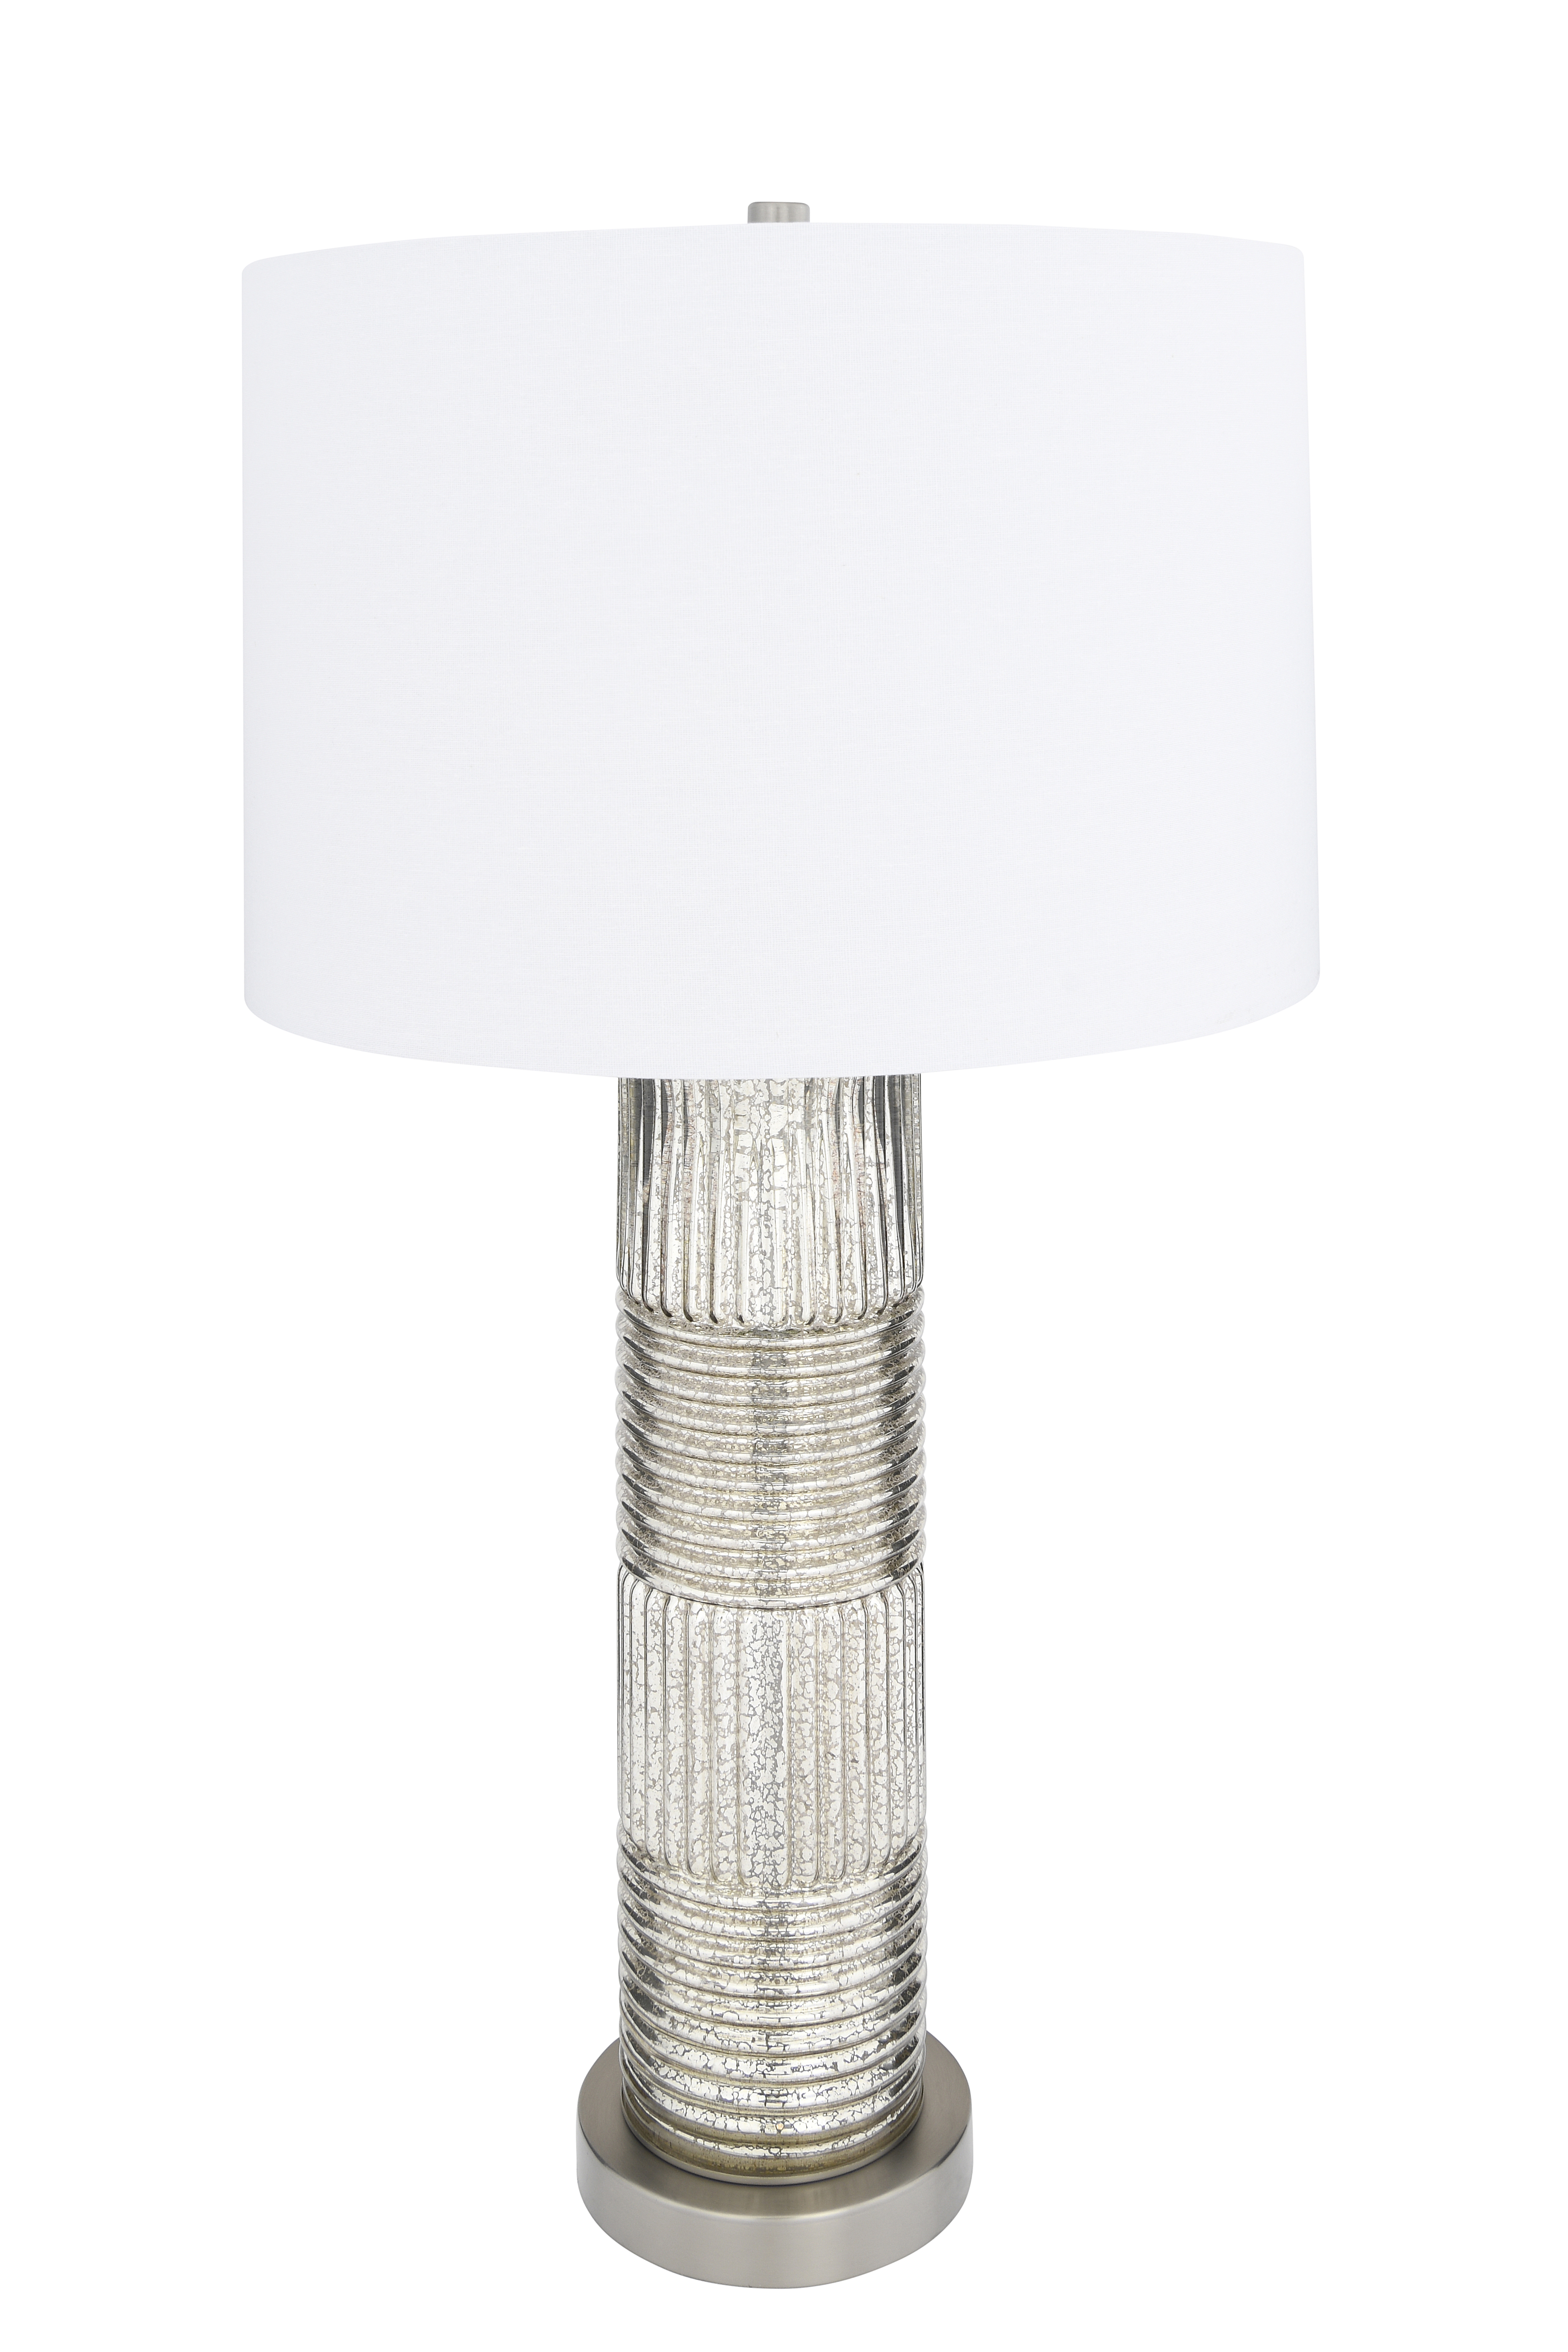 Reeded Glass Table Lamp on Metal Base - Image 0